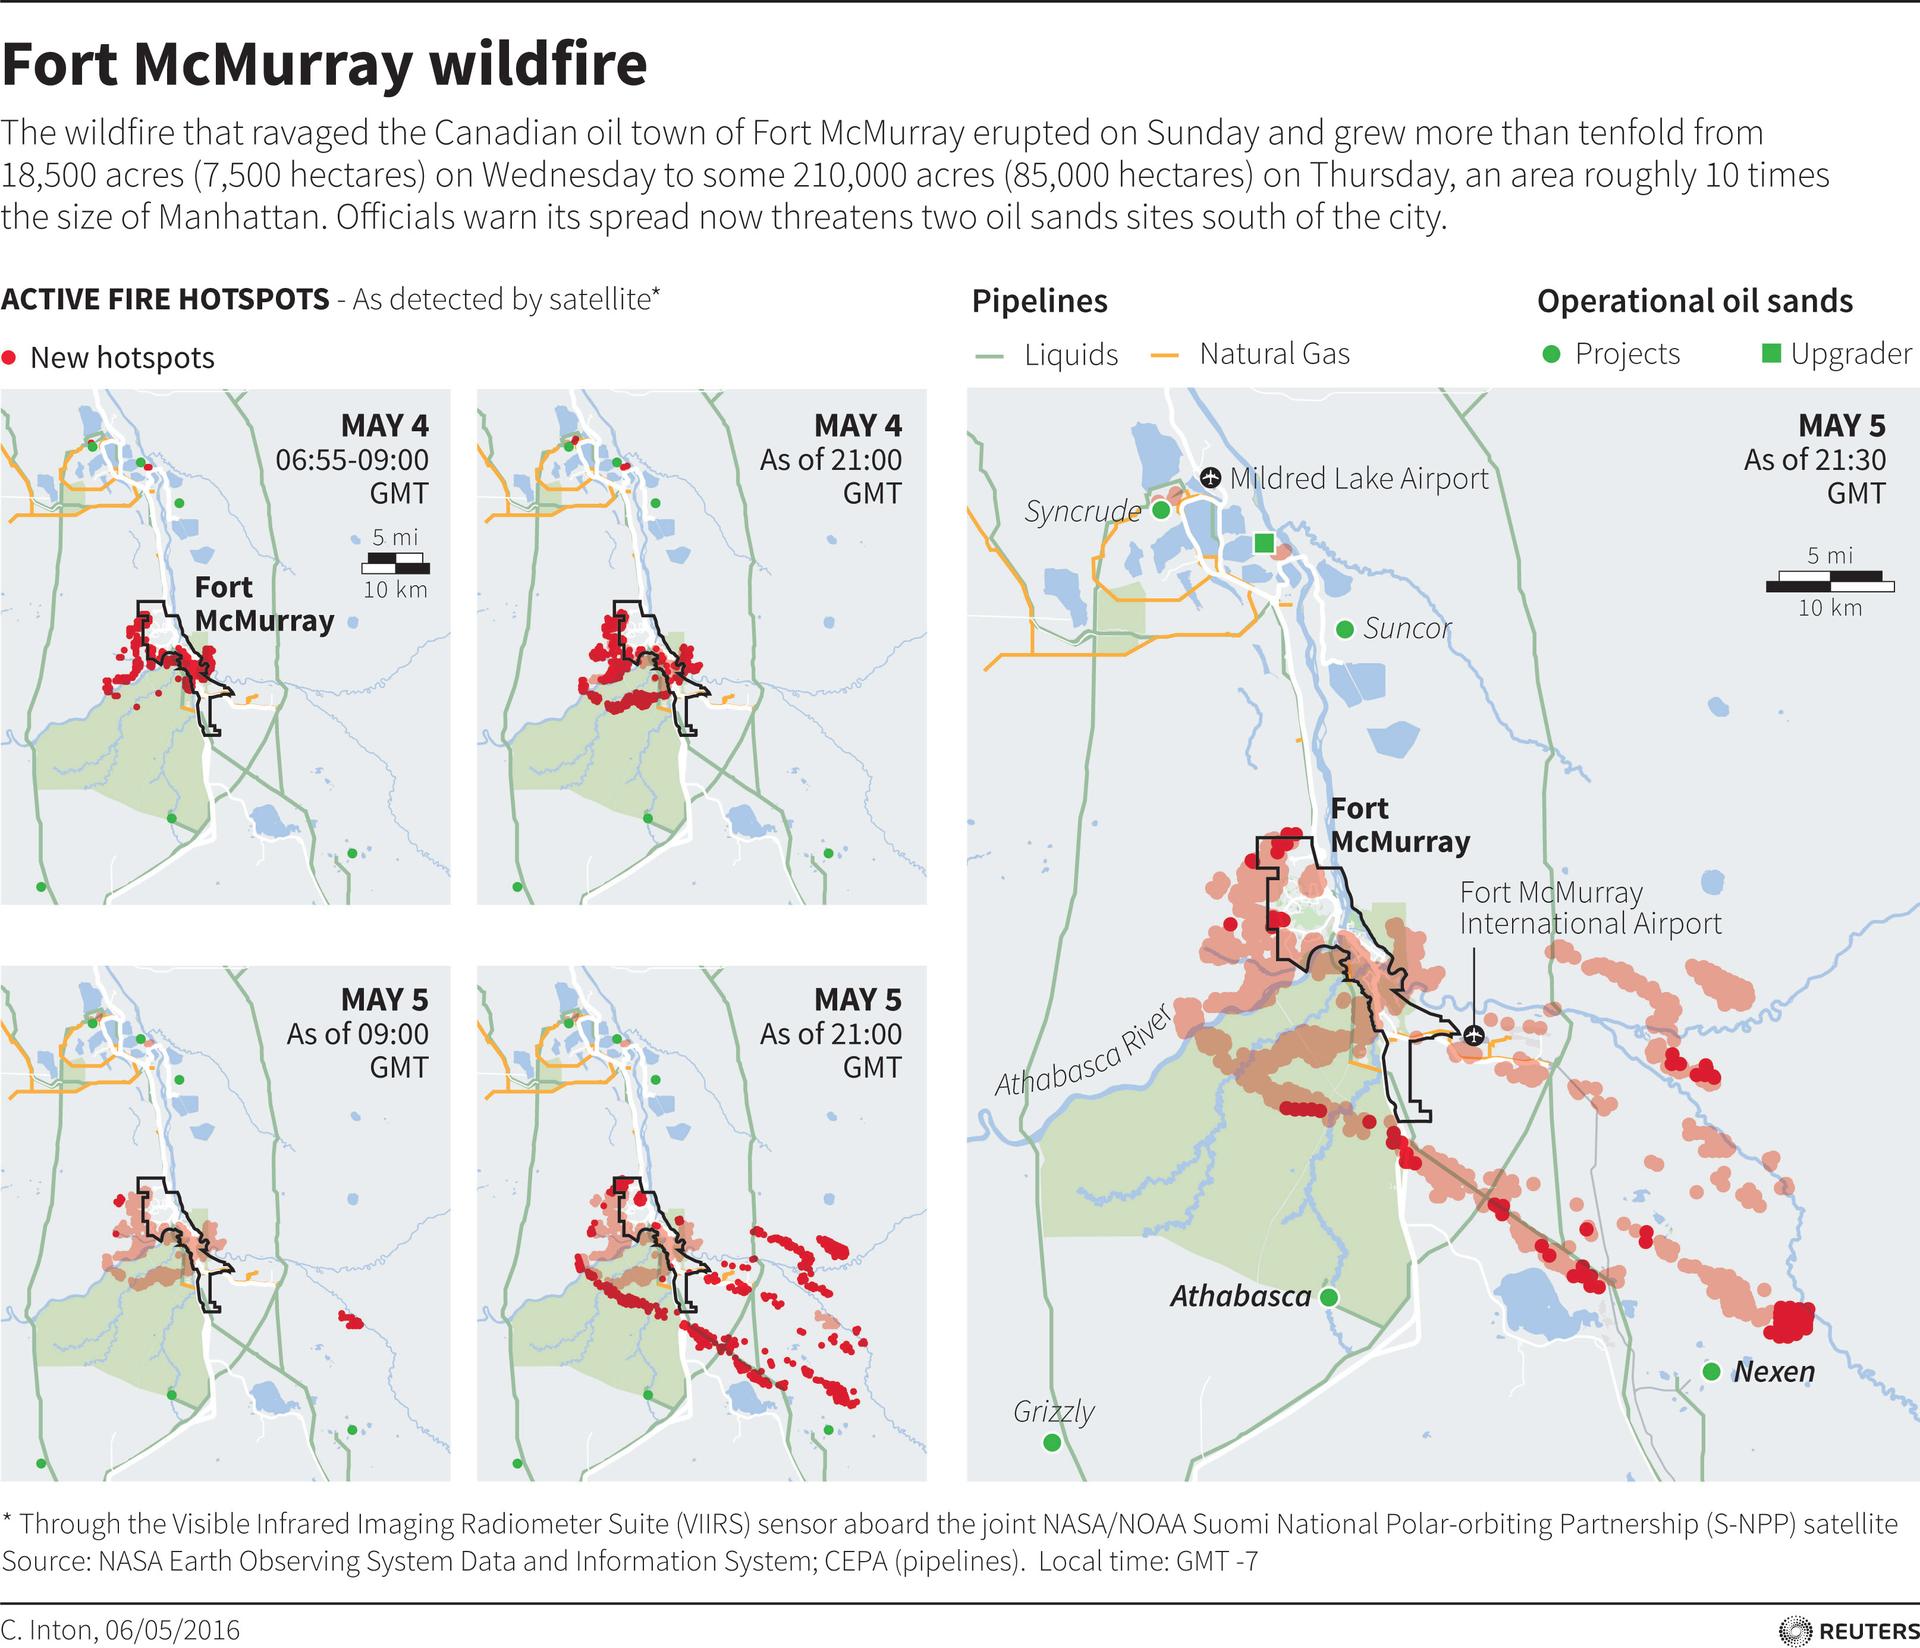 Fort McMurray graphic